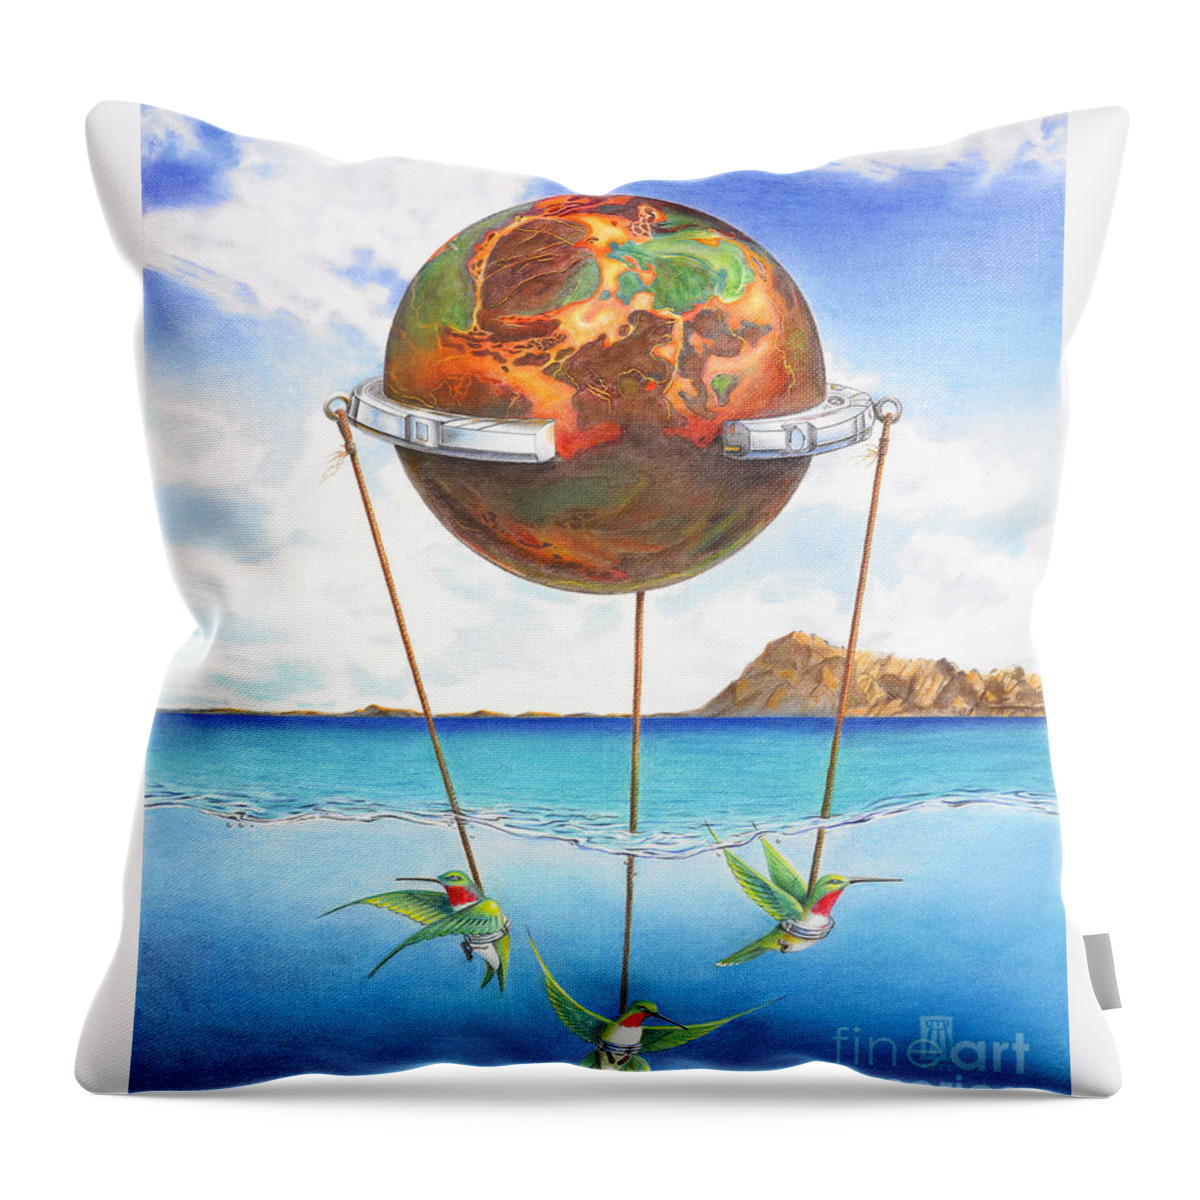 Surreal Throw Pillow featuring the painting Tethered Sphere by Melissa A Benson